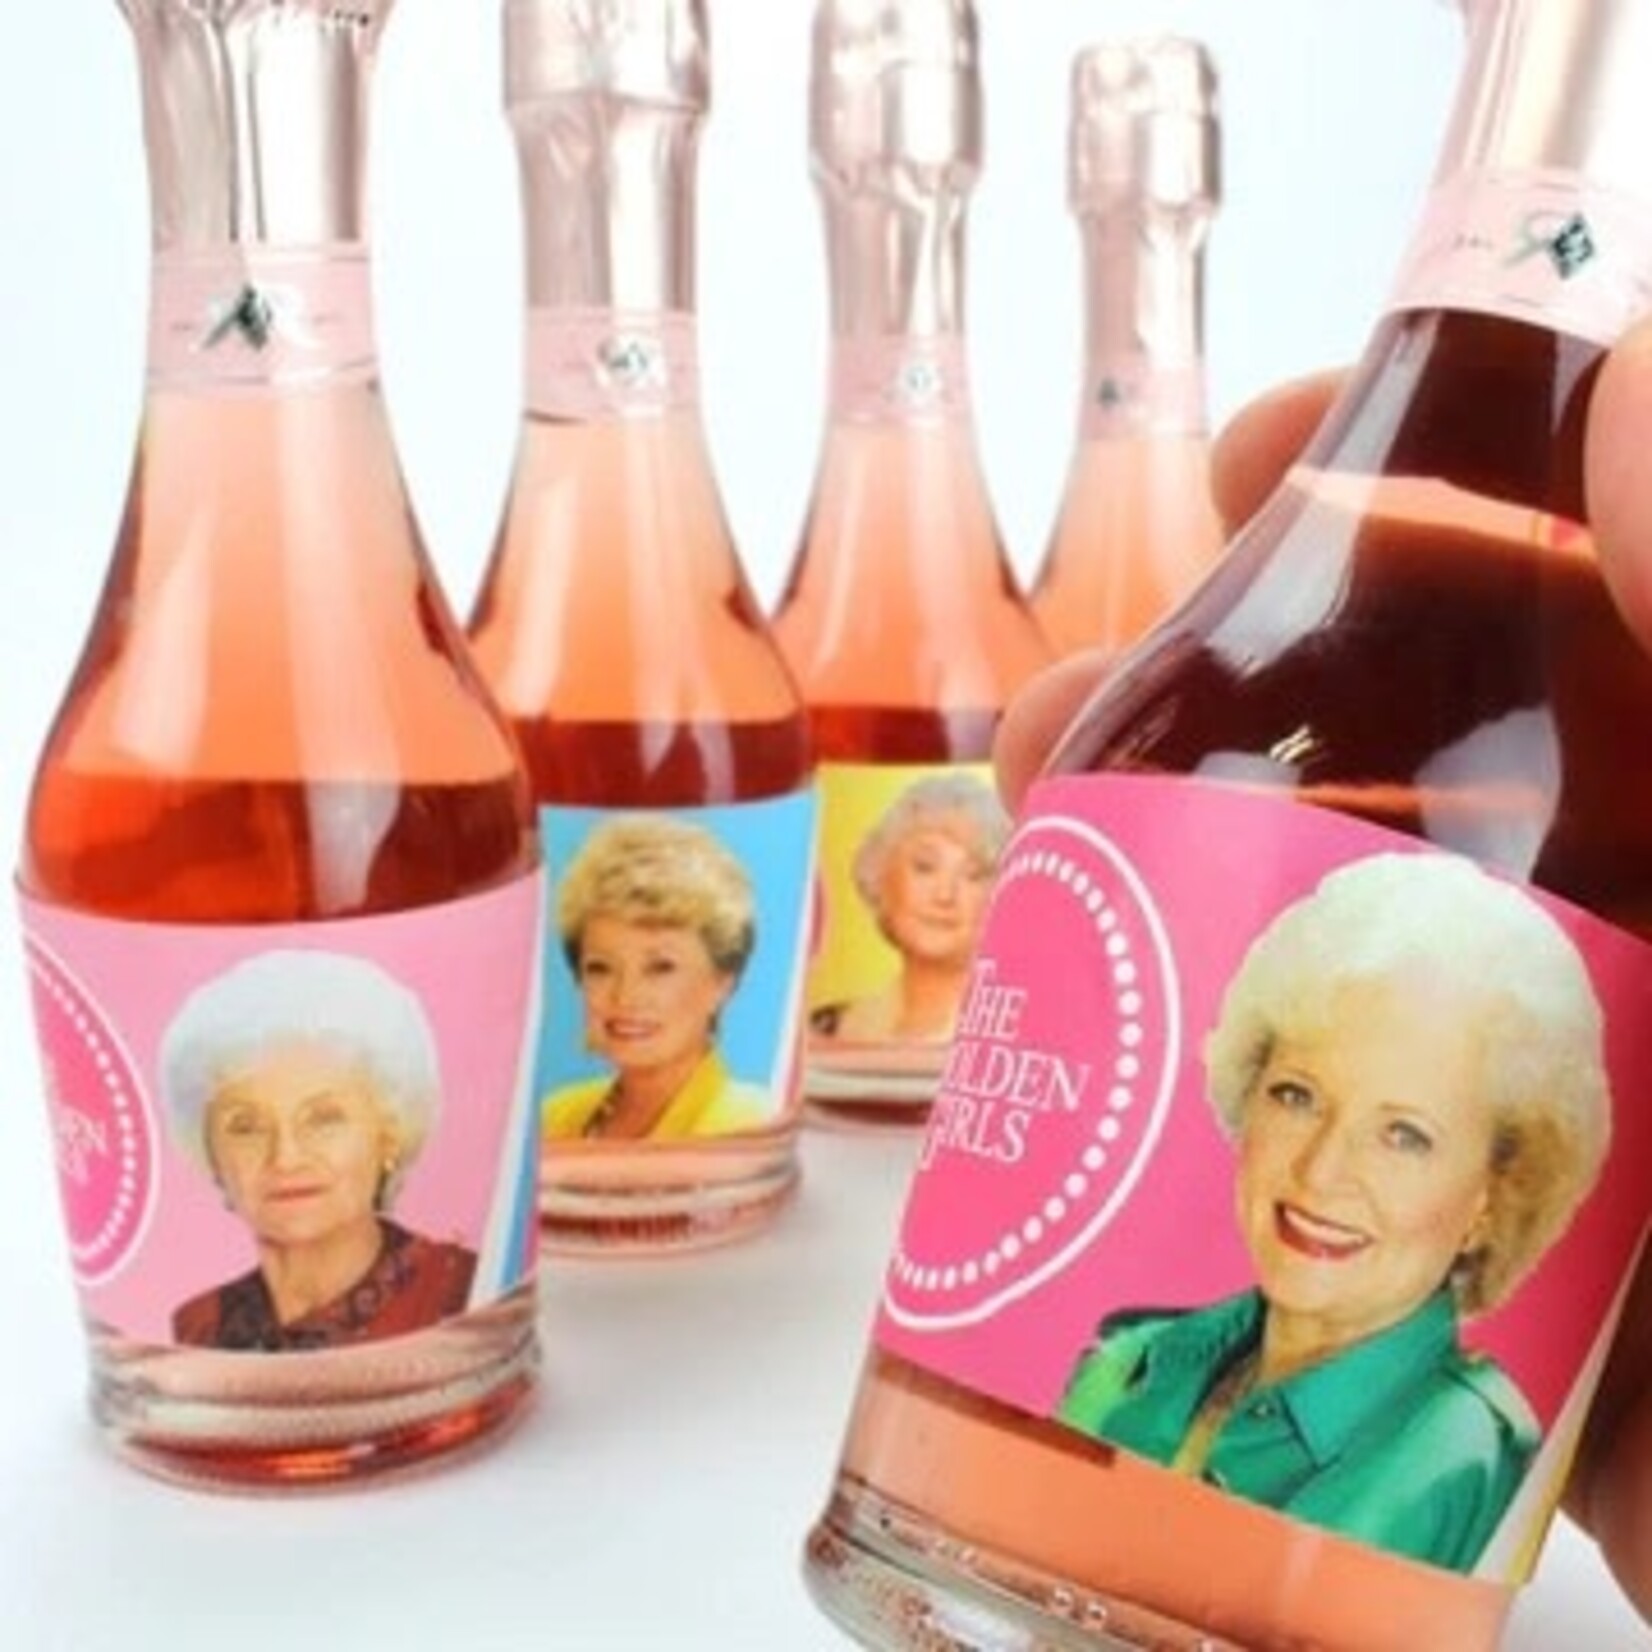 Prime Party The Golden Girls Water Bottle Labels - 16ct.